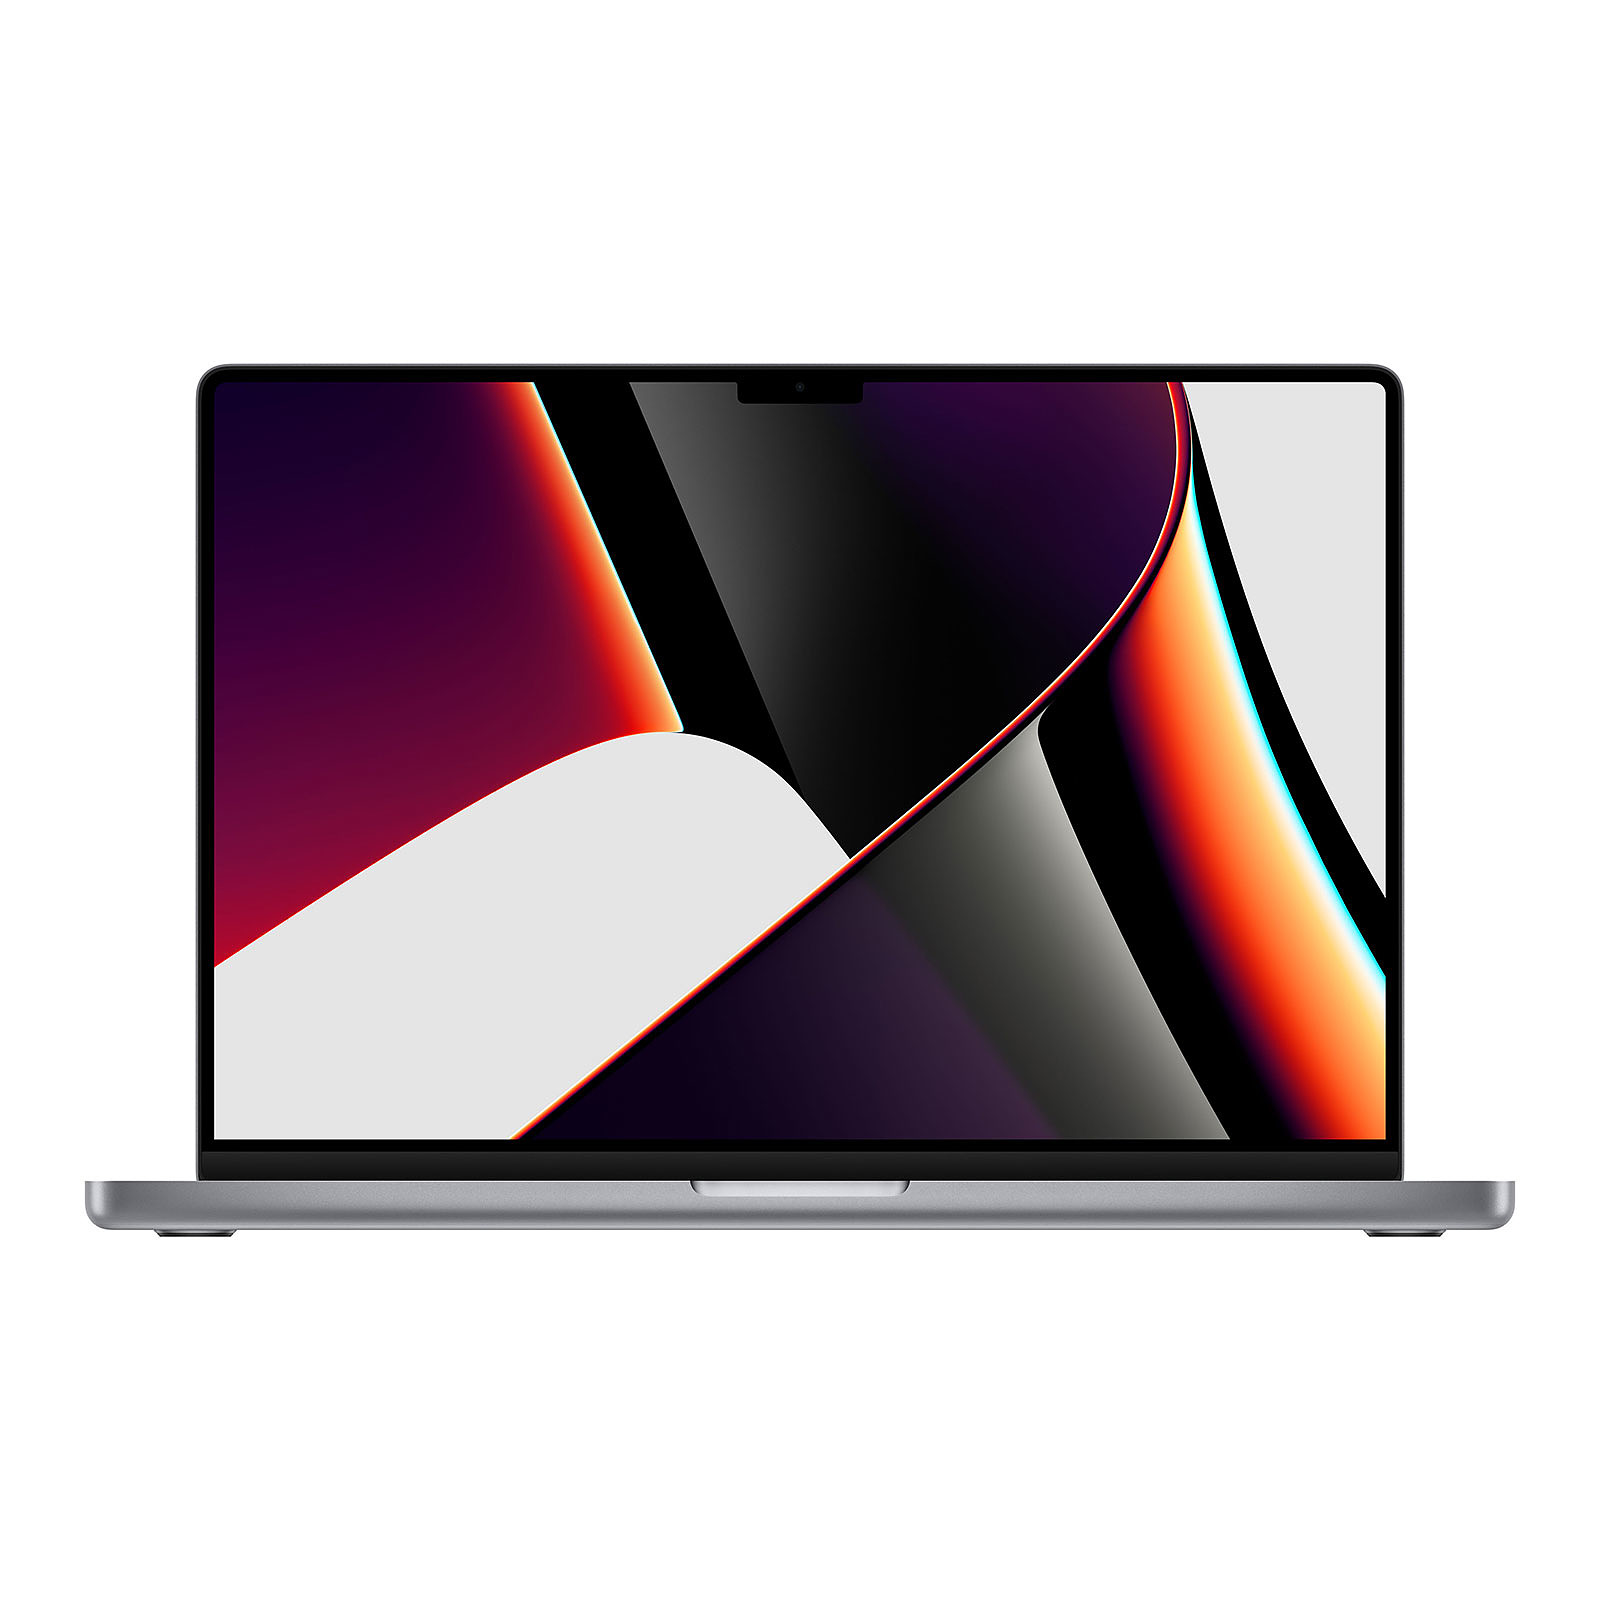 Apple MacBook Pro M1 Pro (2021) 16" Gris sideral 32Go/2To (MK193FN/A-32GB-2TB) - MacBook Apple